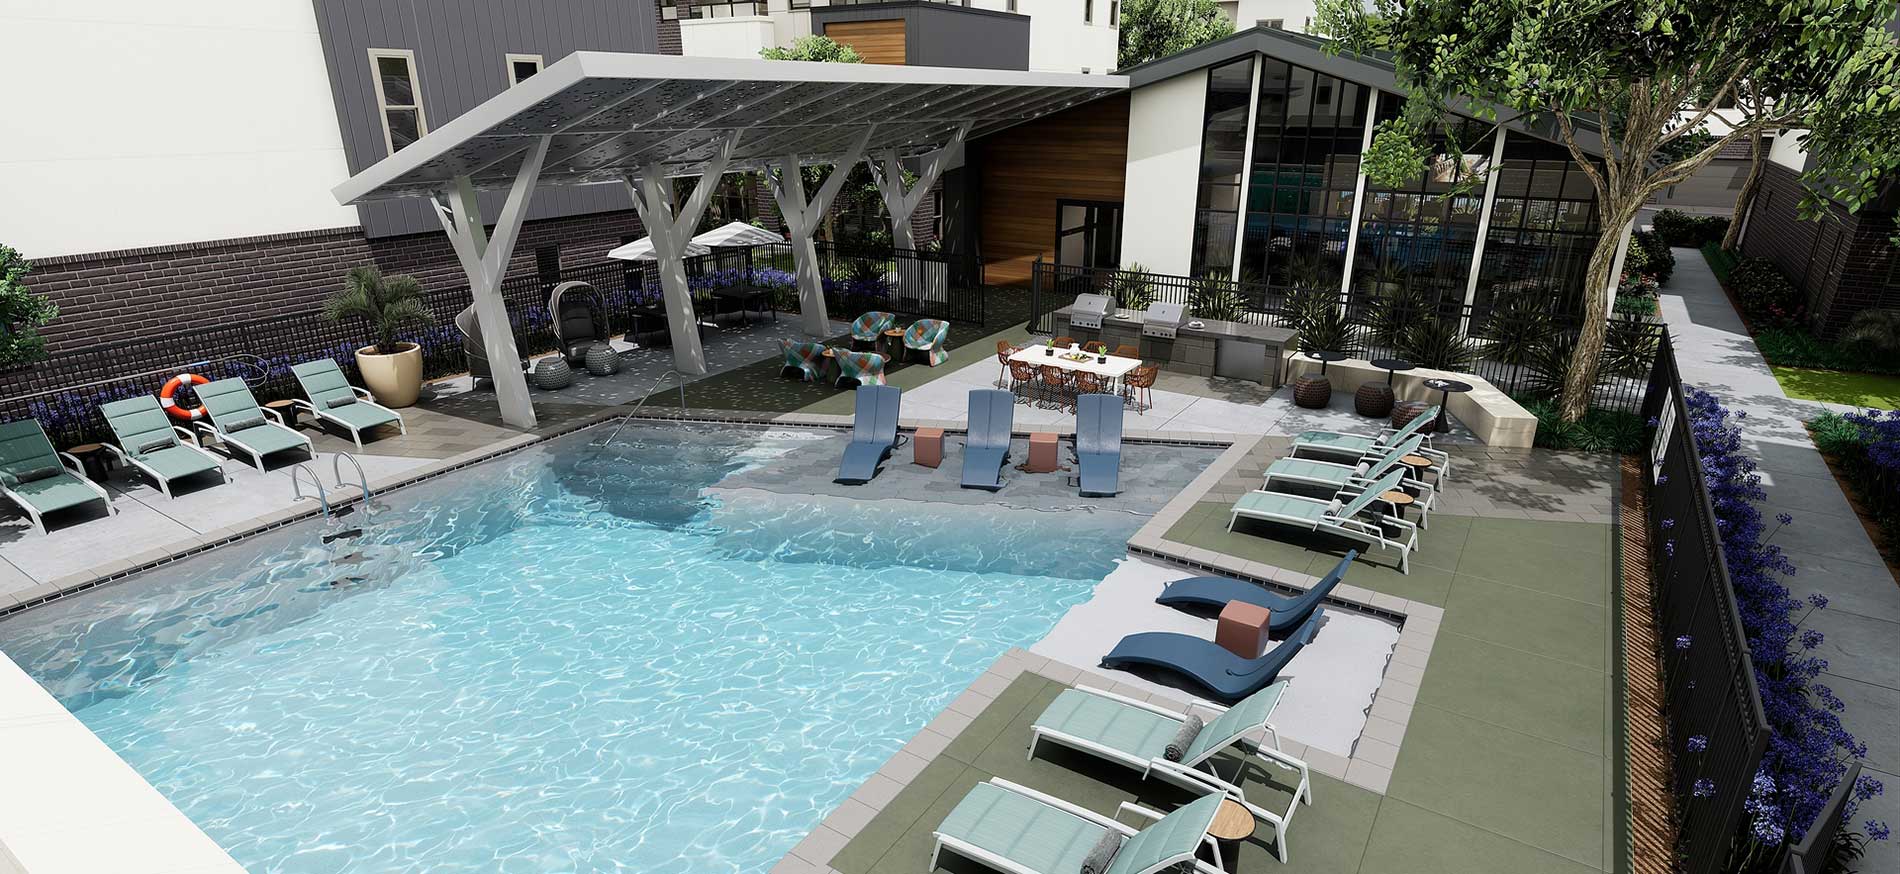 Villas at Fiori pool and lounge chairs rendering